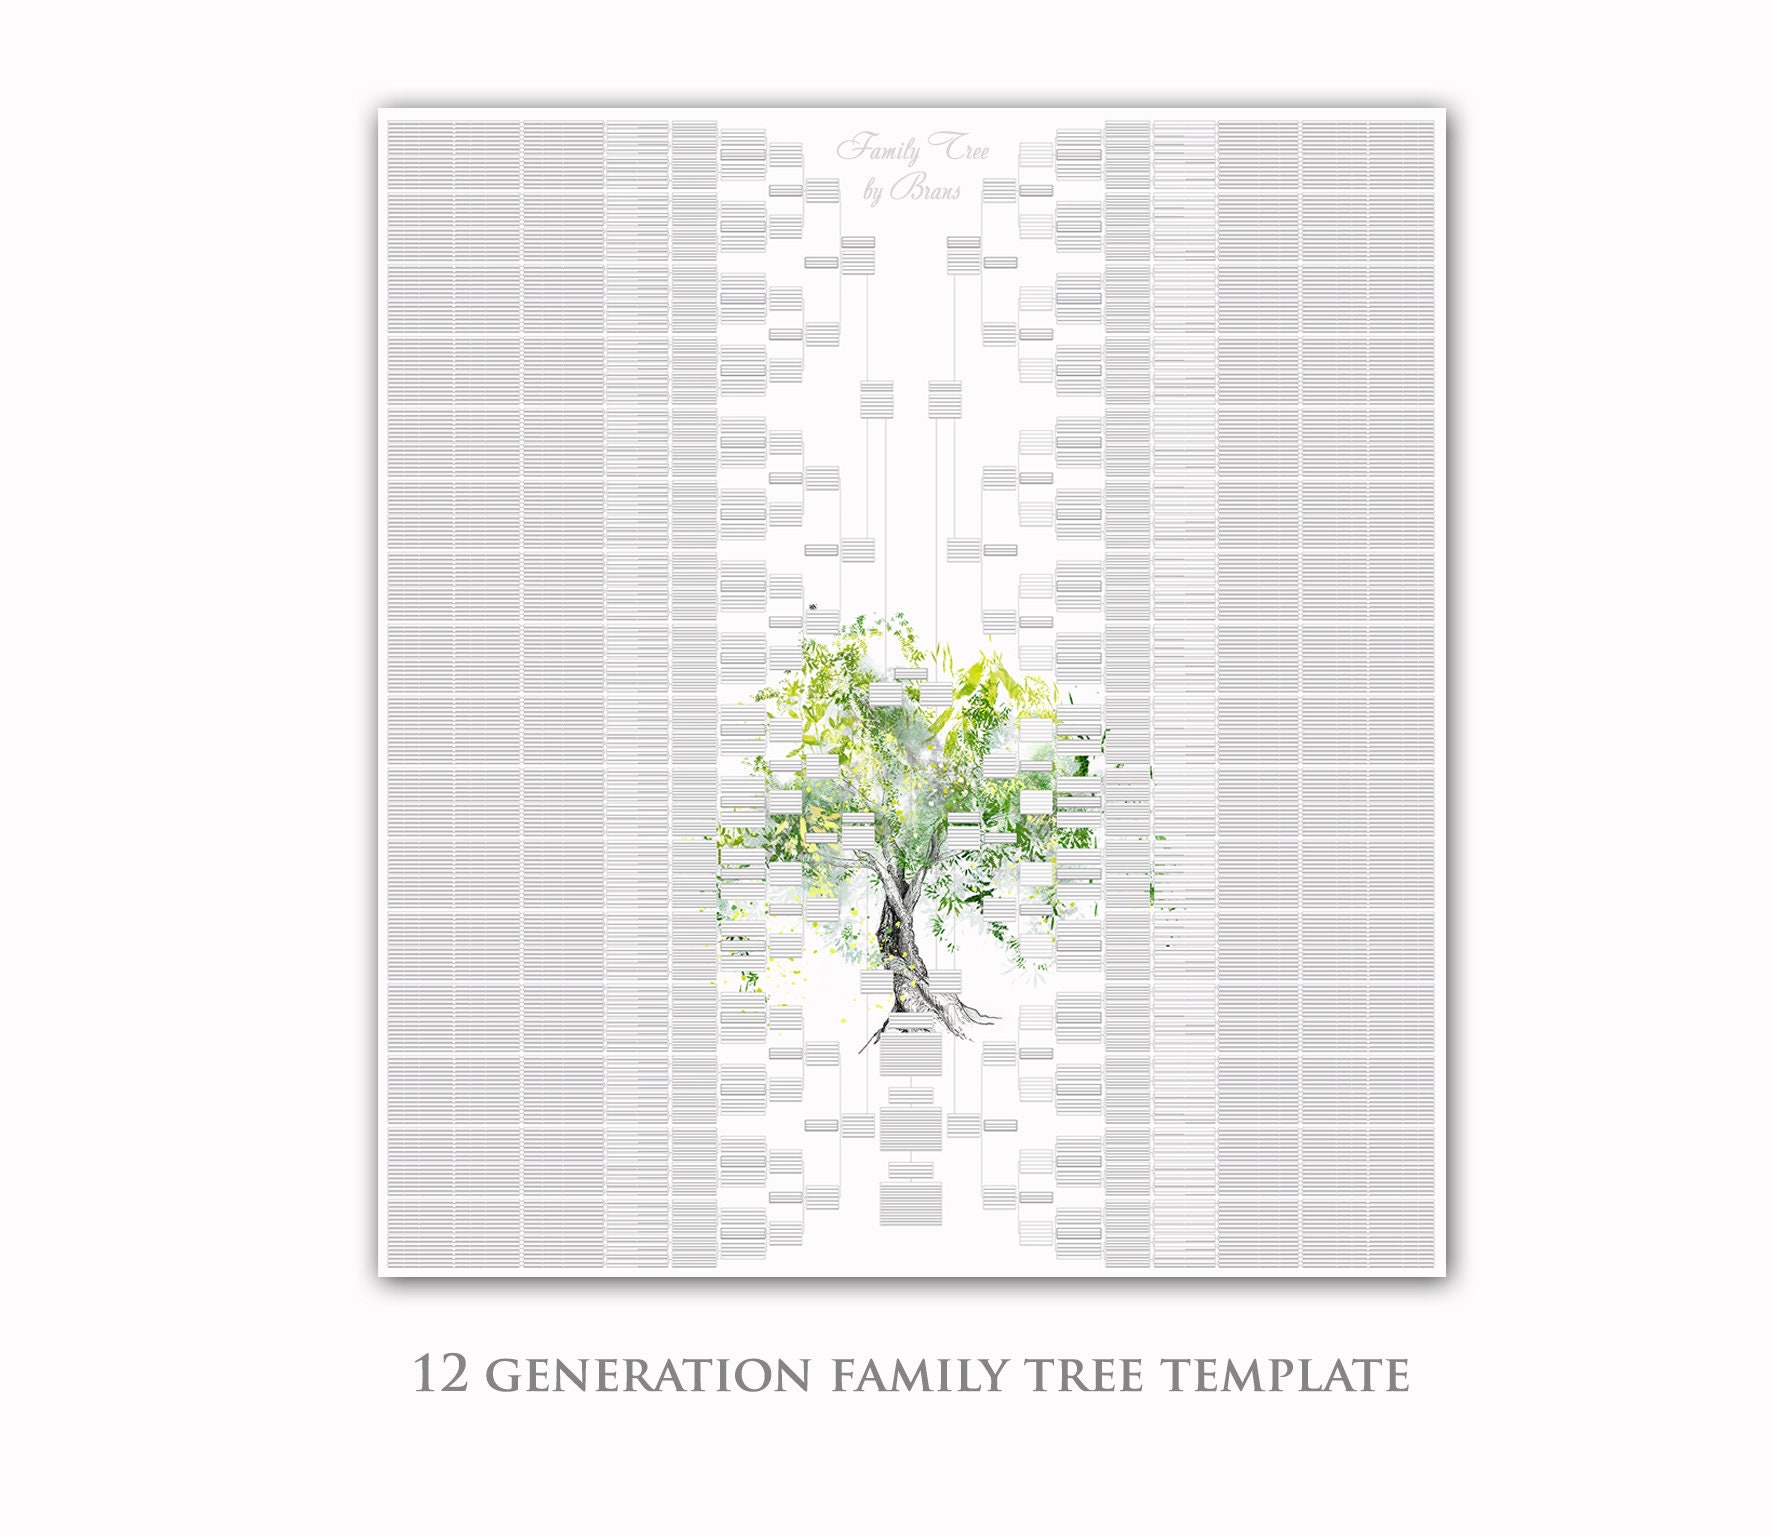 12-generation-family-tree-template-excel